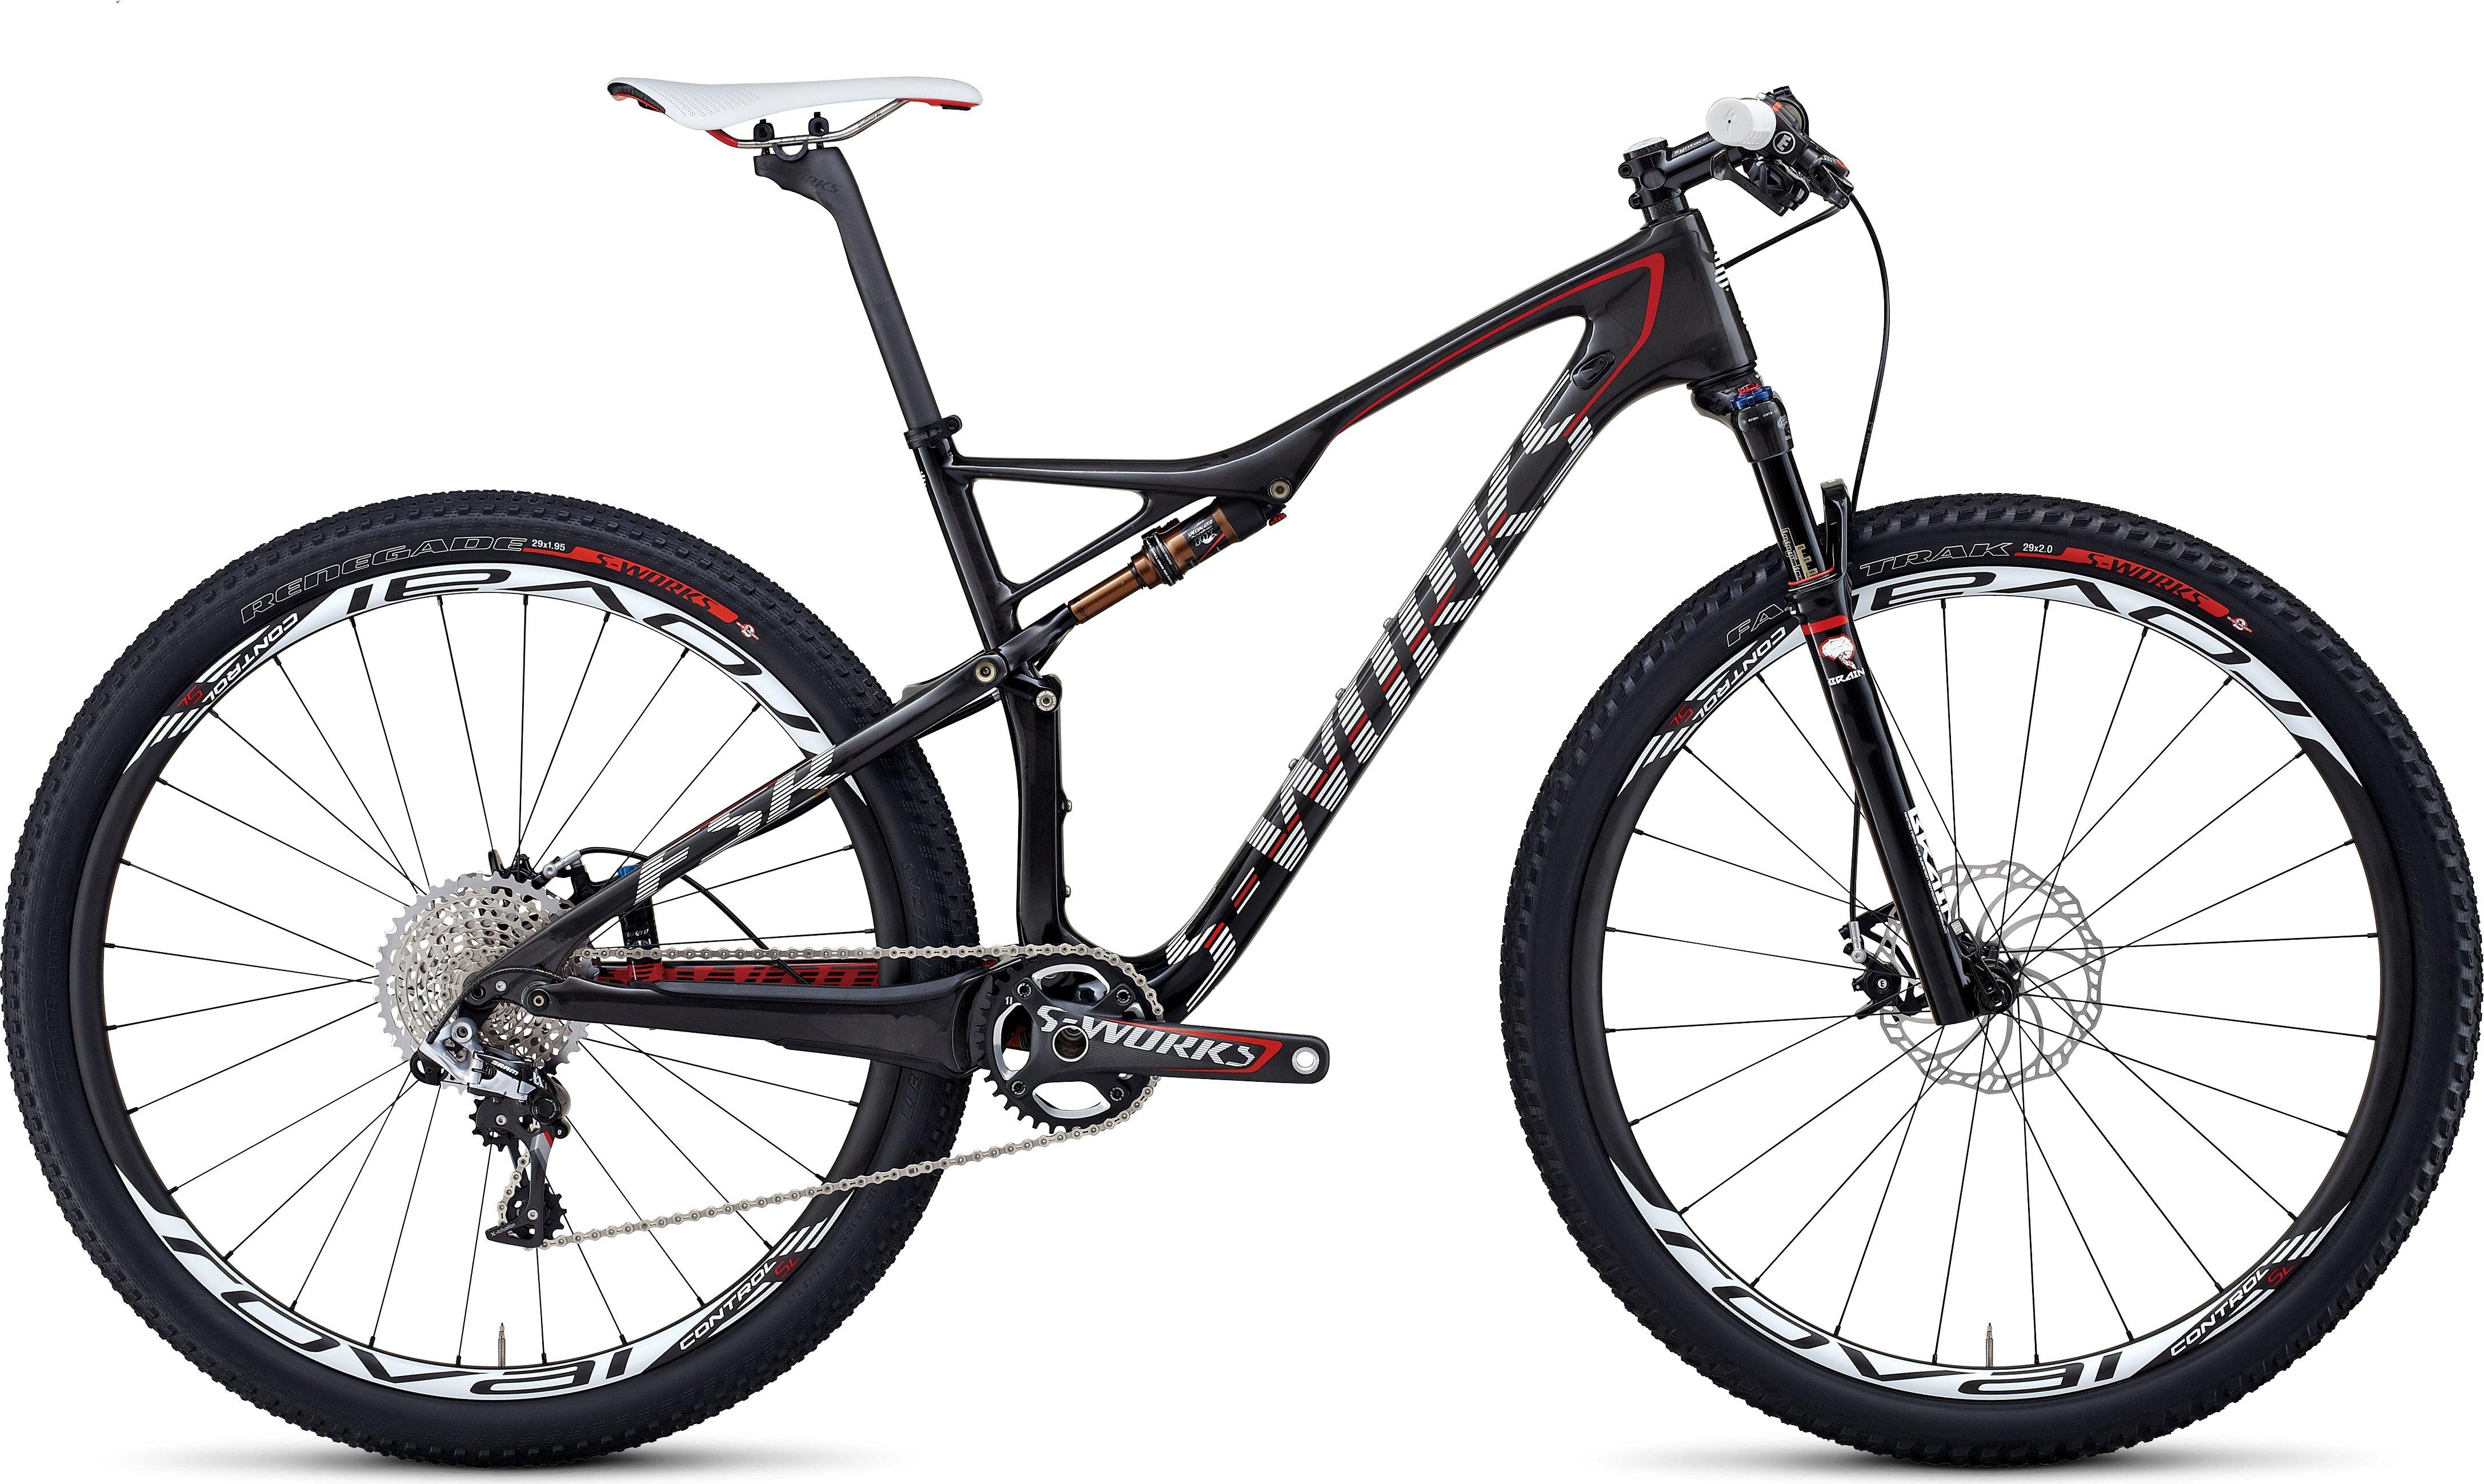 S-Works Epic 29 World Cup